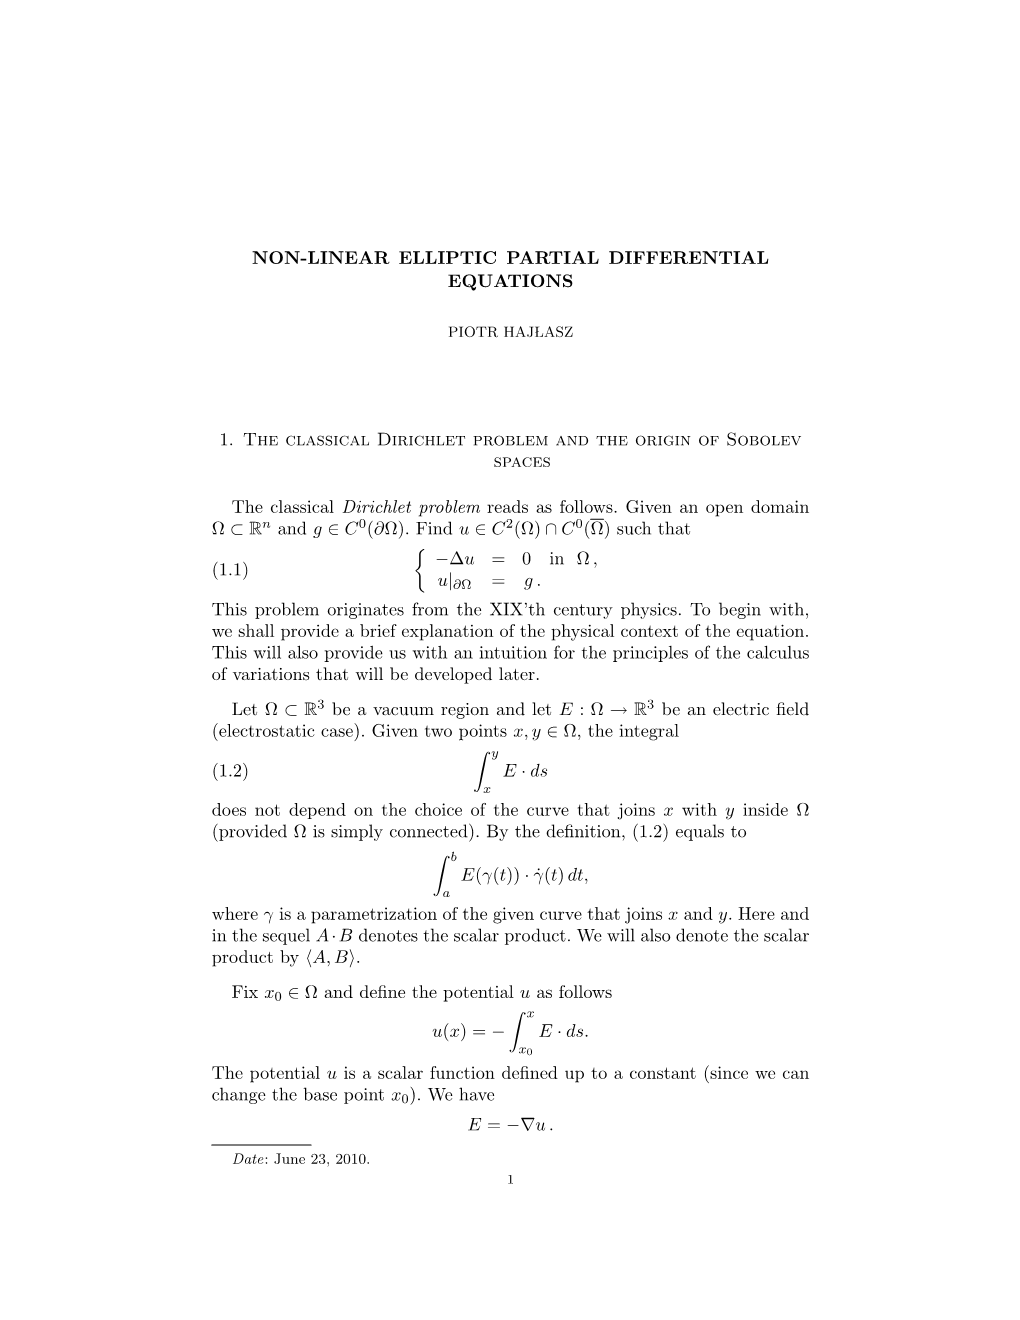 NON-LINEAR ELLIPTIC PARTIAL DIFFERENTIAL EQUATIONS 1. The